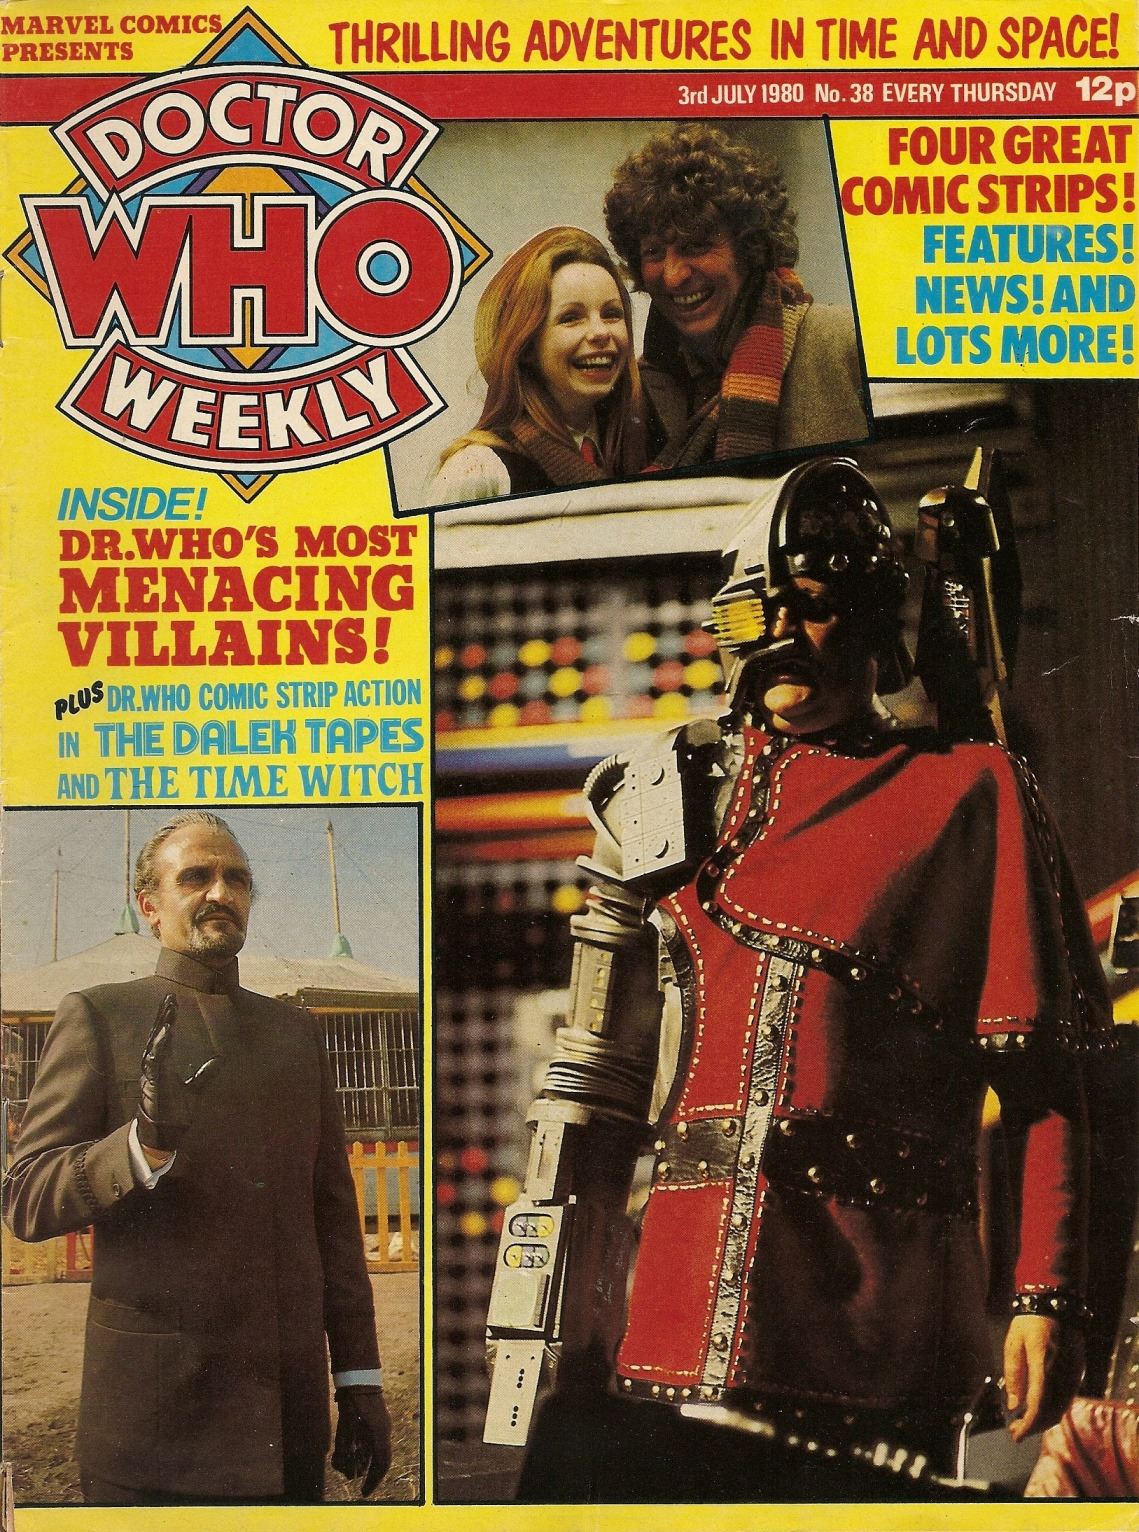 Doctor Who Weekly - Issue 38 - 3rd July 1980